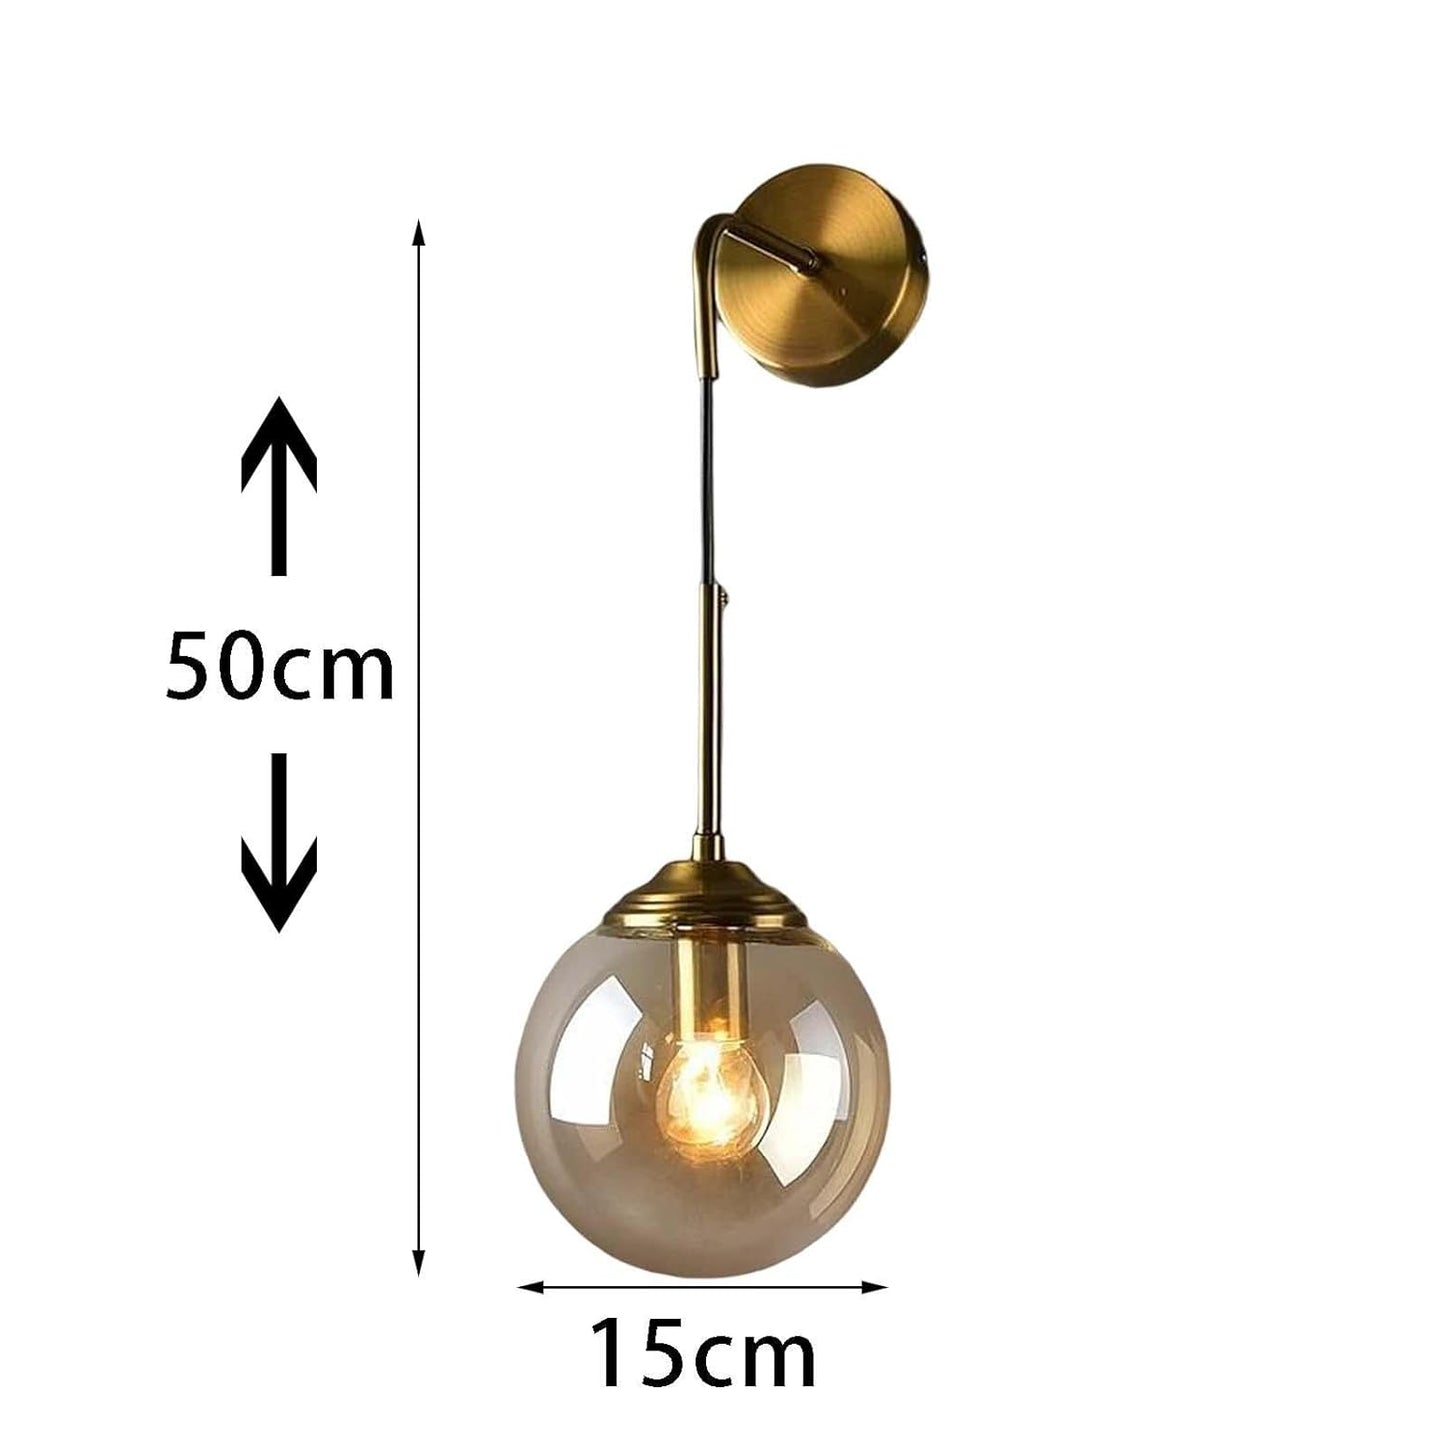 AHUJA INTERNATIONAL Antique Plating Elevated Pendant Wall Lamp Light for Living Room, Bedroom, Hallway, Offices, Lobby and Any Interior Decoration INTERNATIONAL